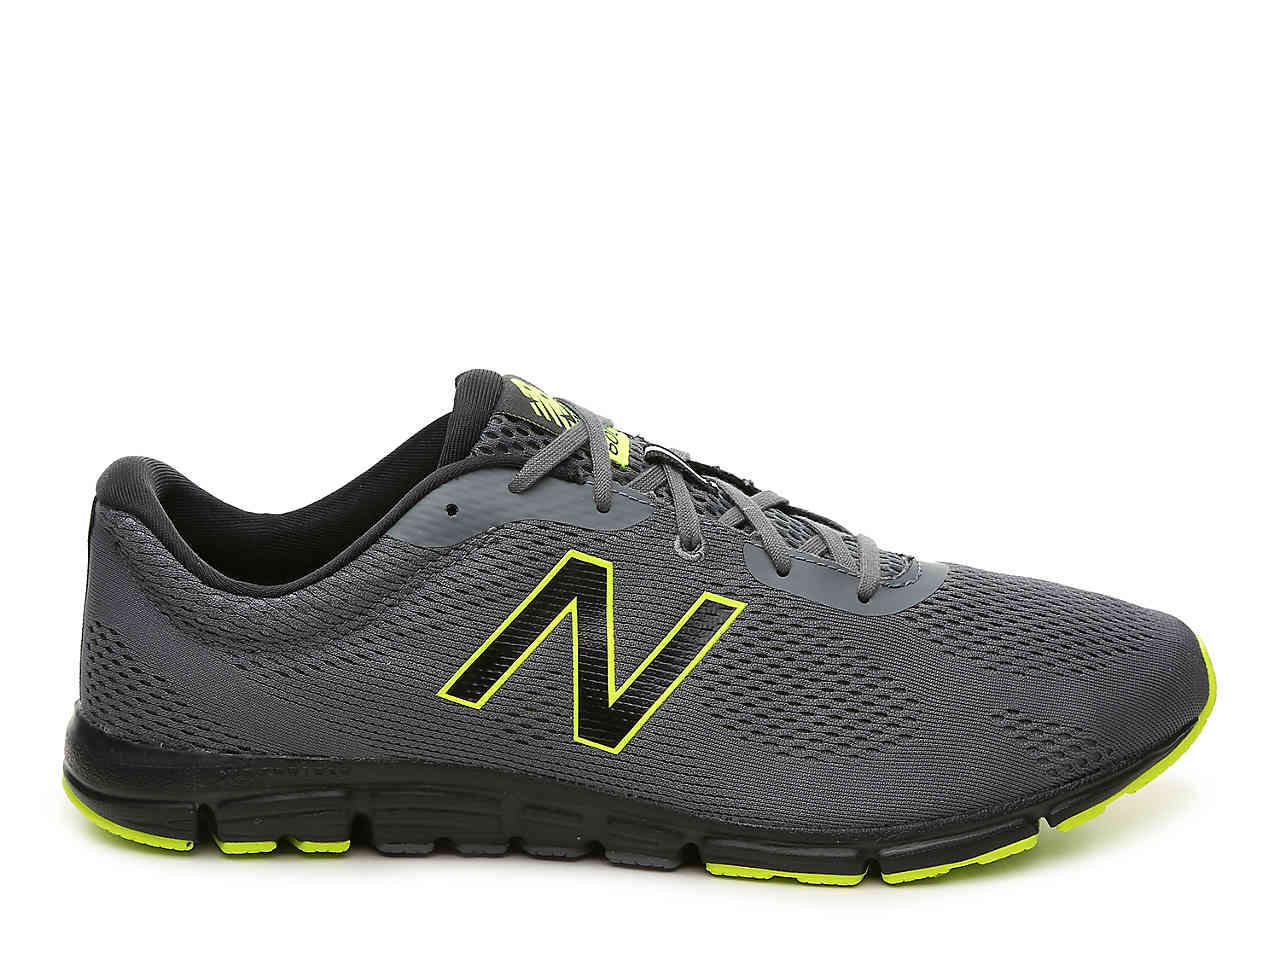 New Balance Synthetic 600 V2 Lightweight Running Shoe in Charcoal Grey ...